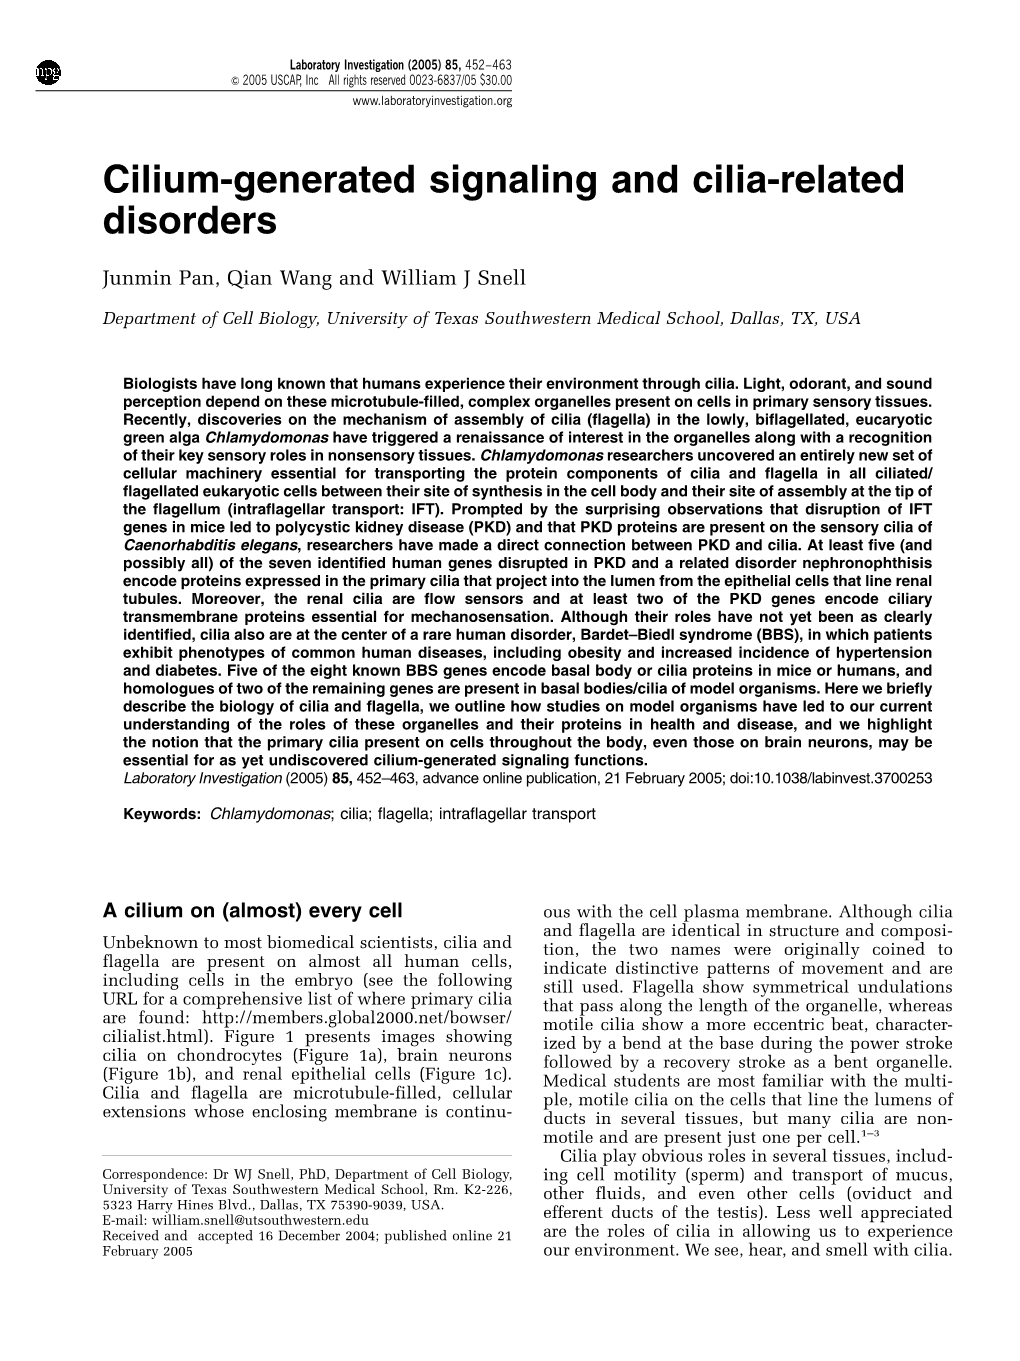 Cilium-Generated Signaling and Cilia-Related Disorders